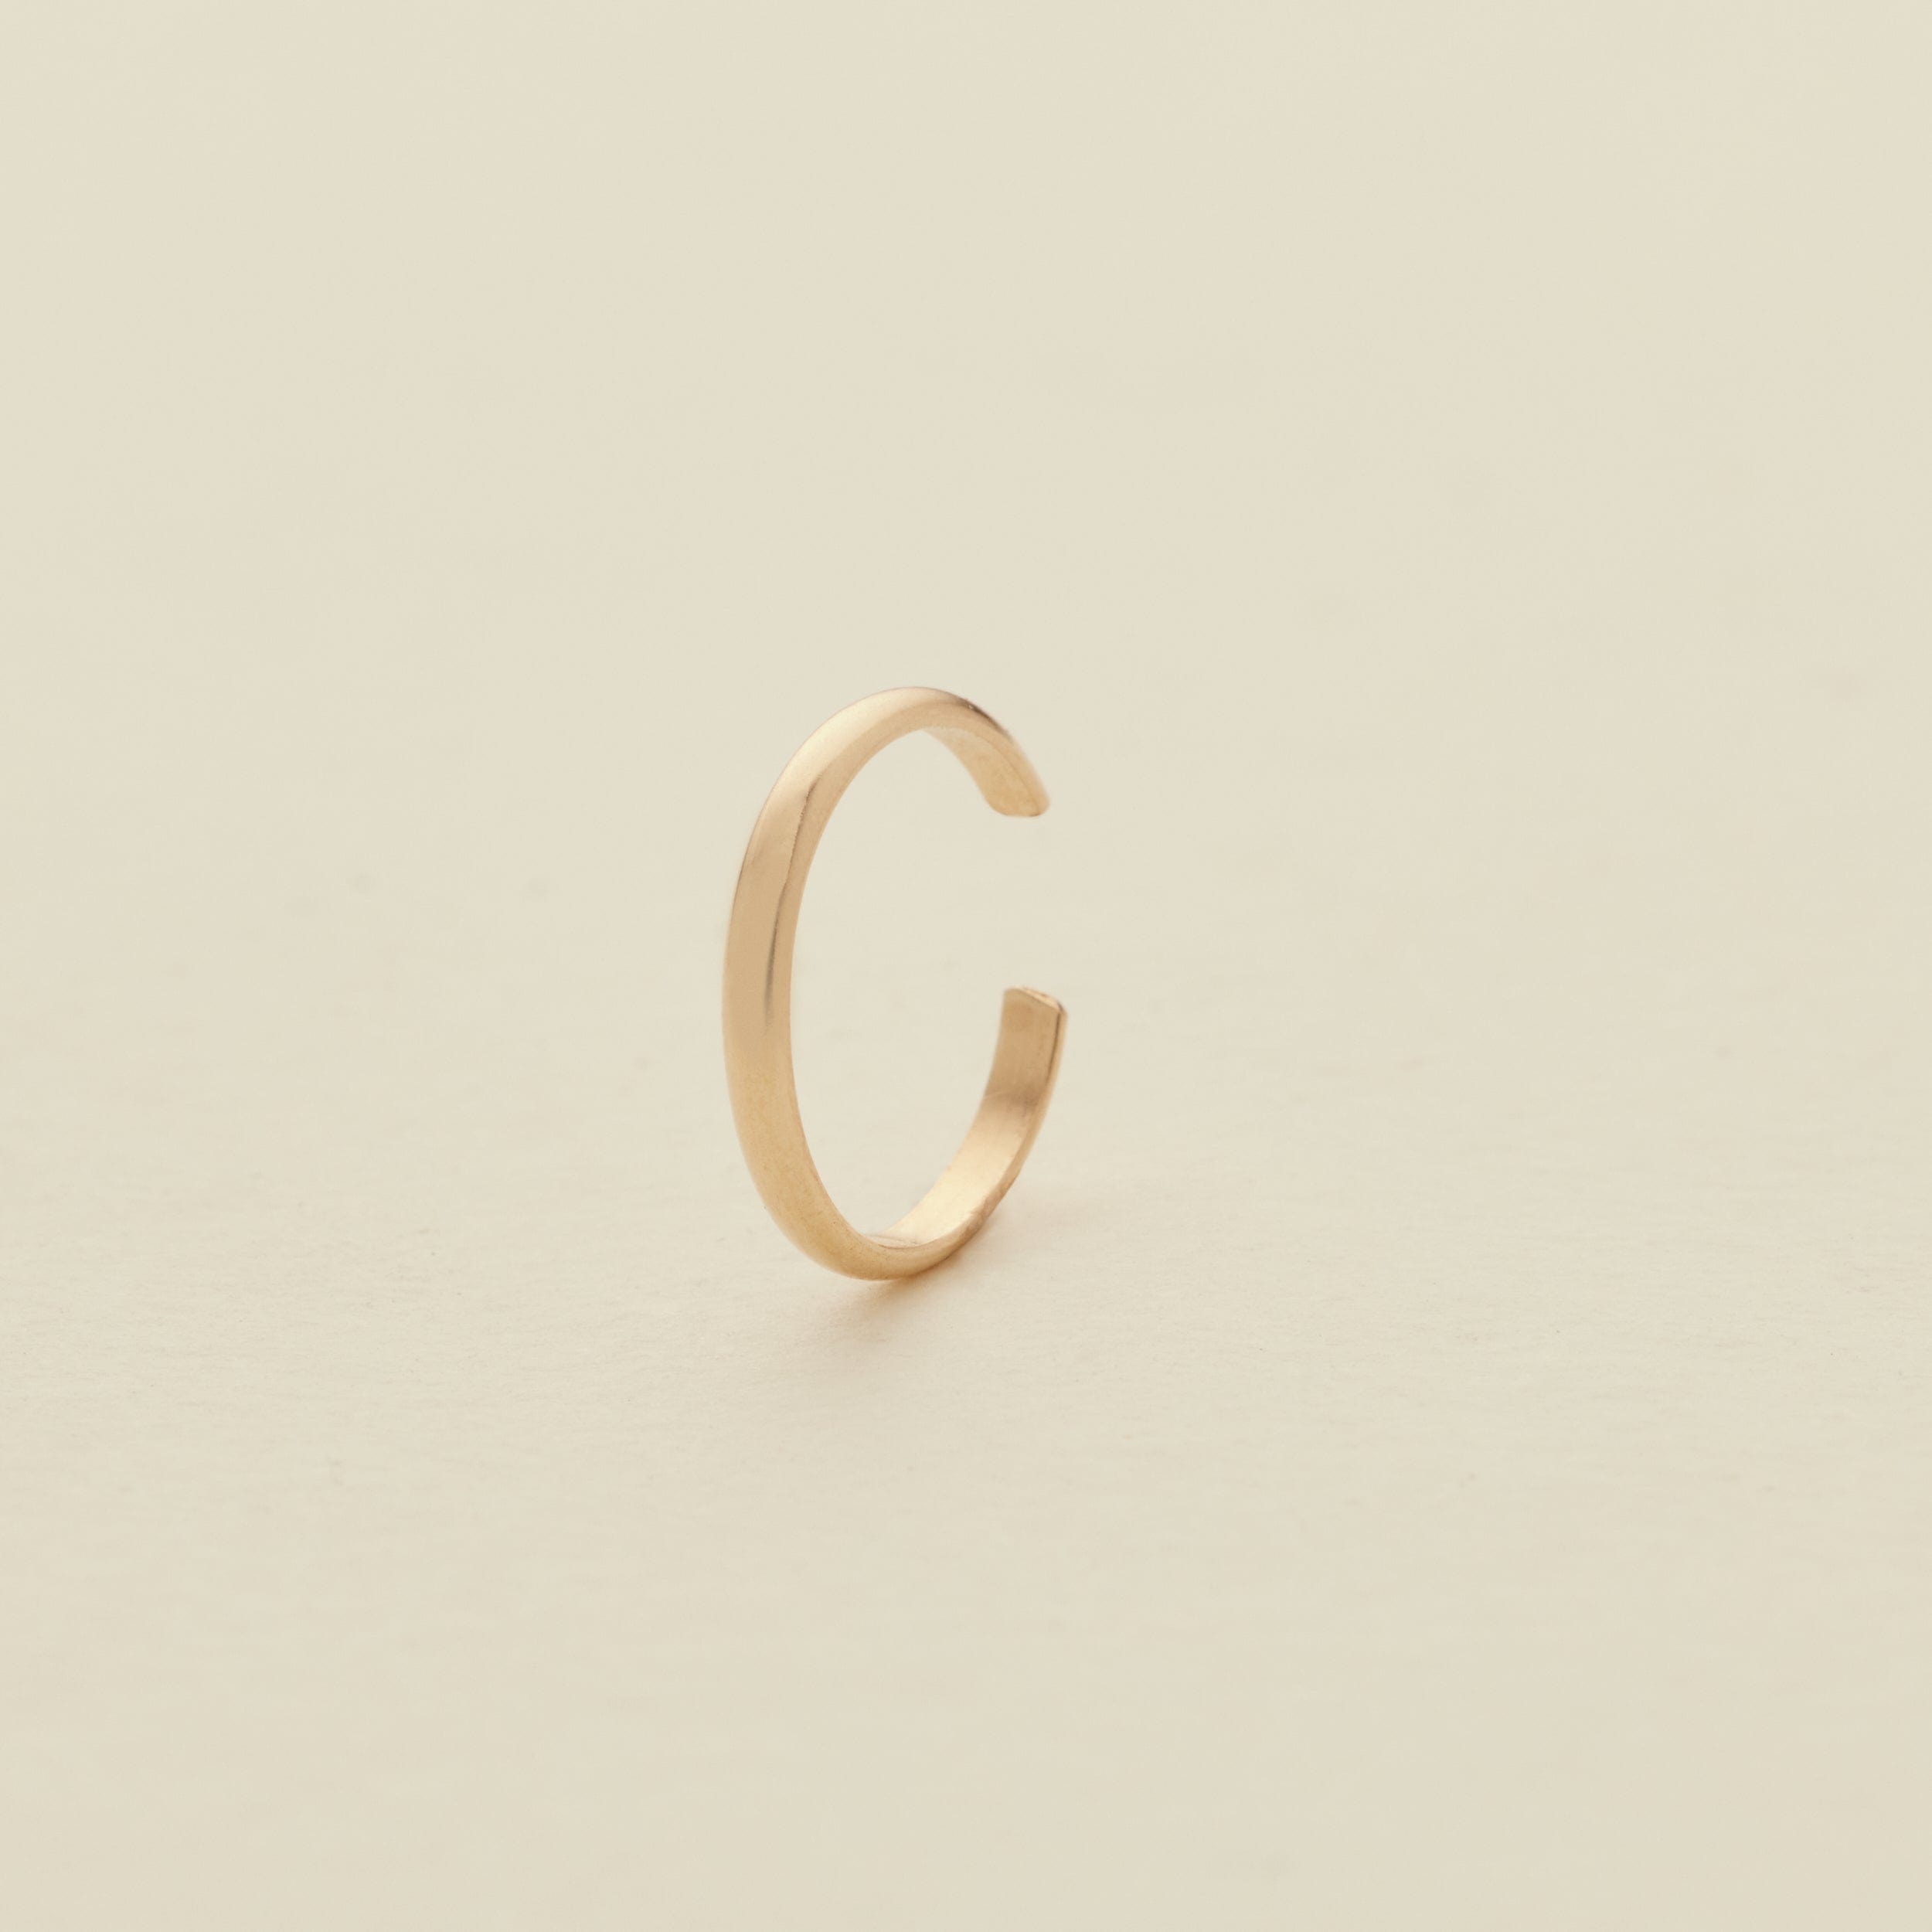 Luster Rounded Cuff Earring - Single Gold Filled Earring